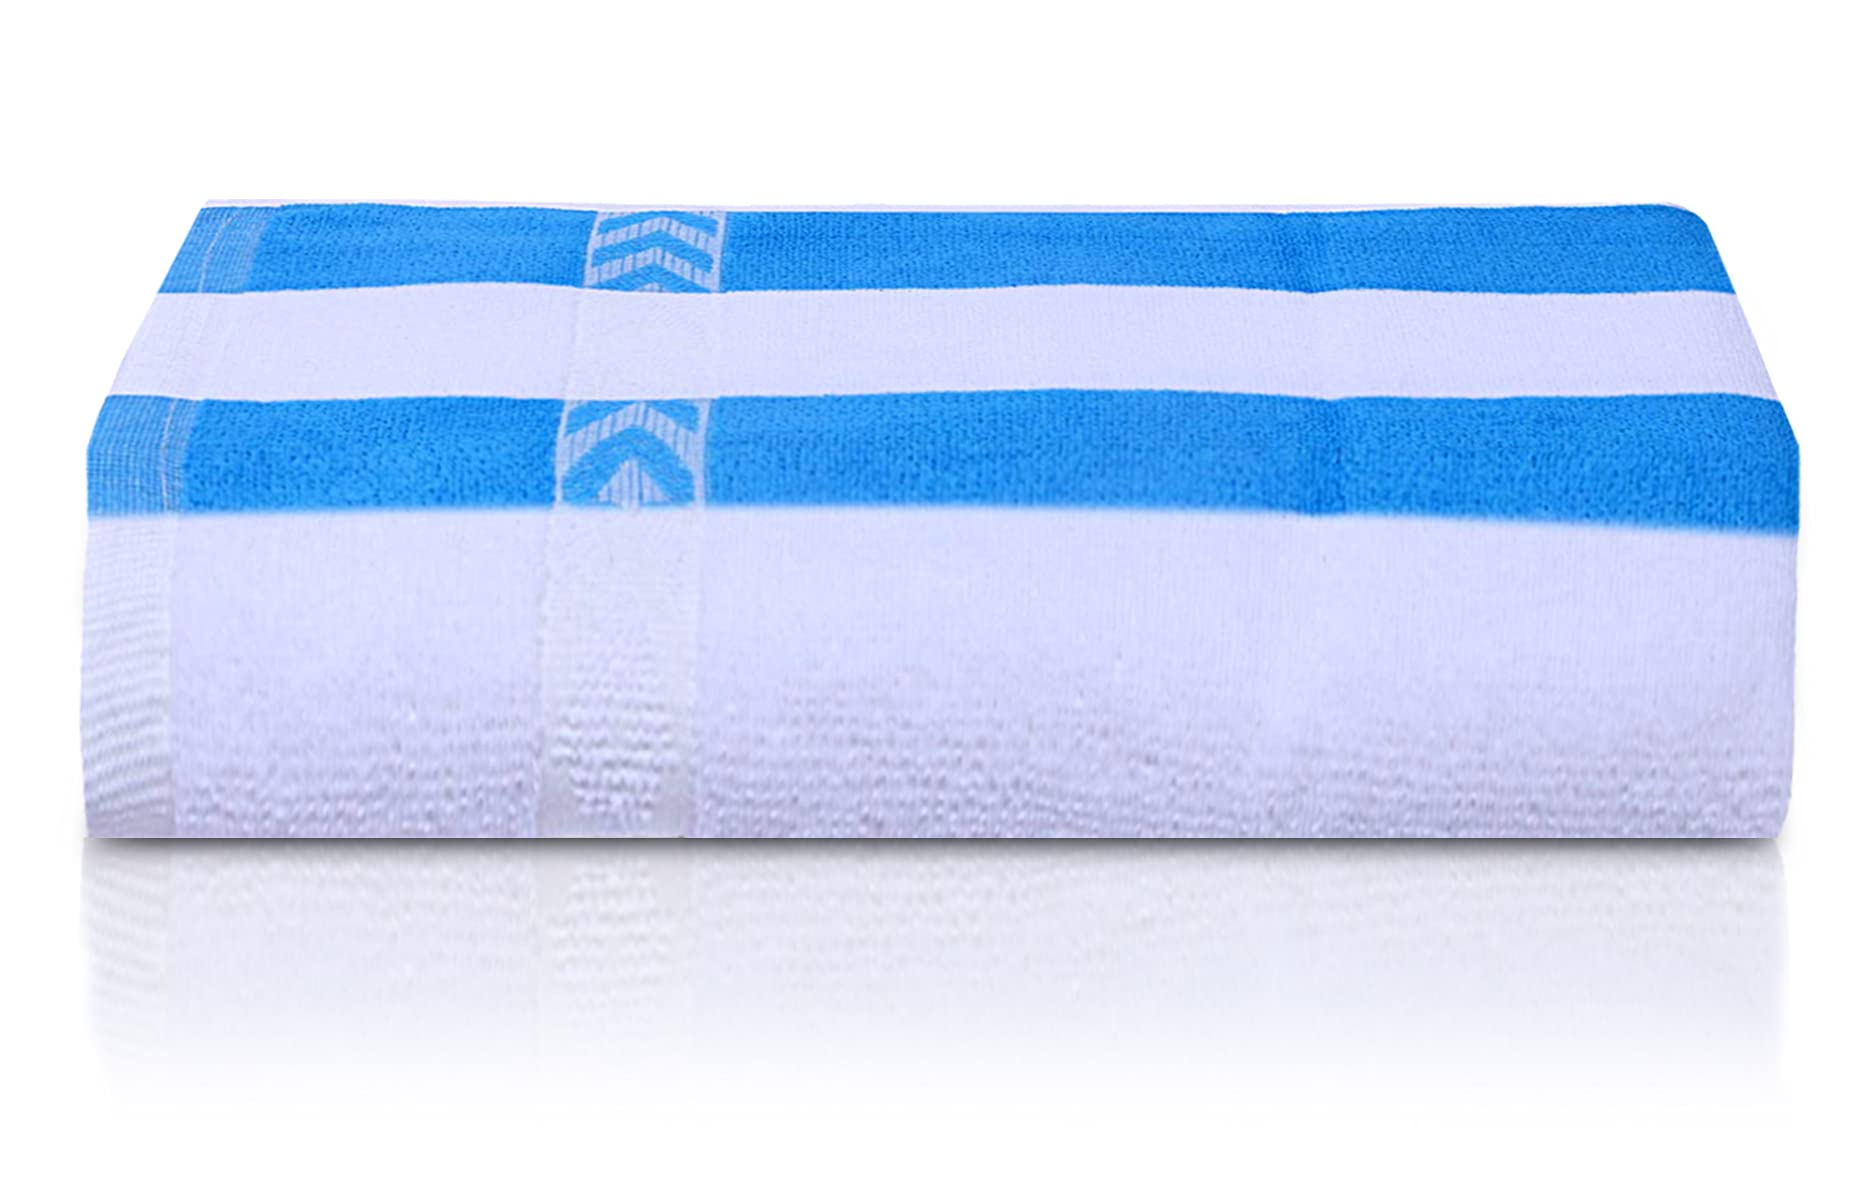 Kuber Industries Cotton Bath Towel Super Soft, Fluffy, and Absorbent, Perfect for Daily Use 100% Cotton Towels, 400 GSM- Pack of 2 (Blue & Pink), (Model: HS_37_KUBMART019835)